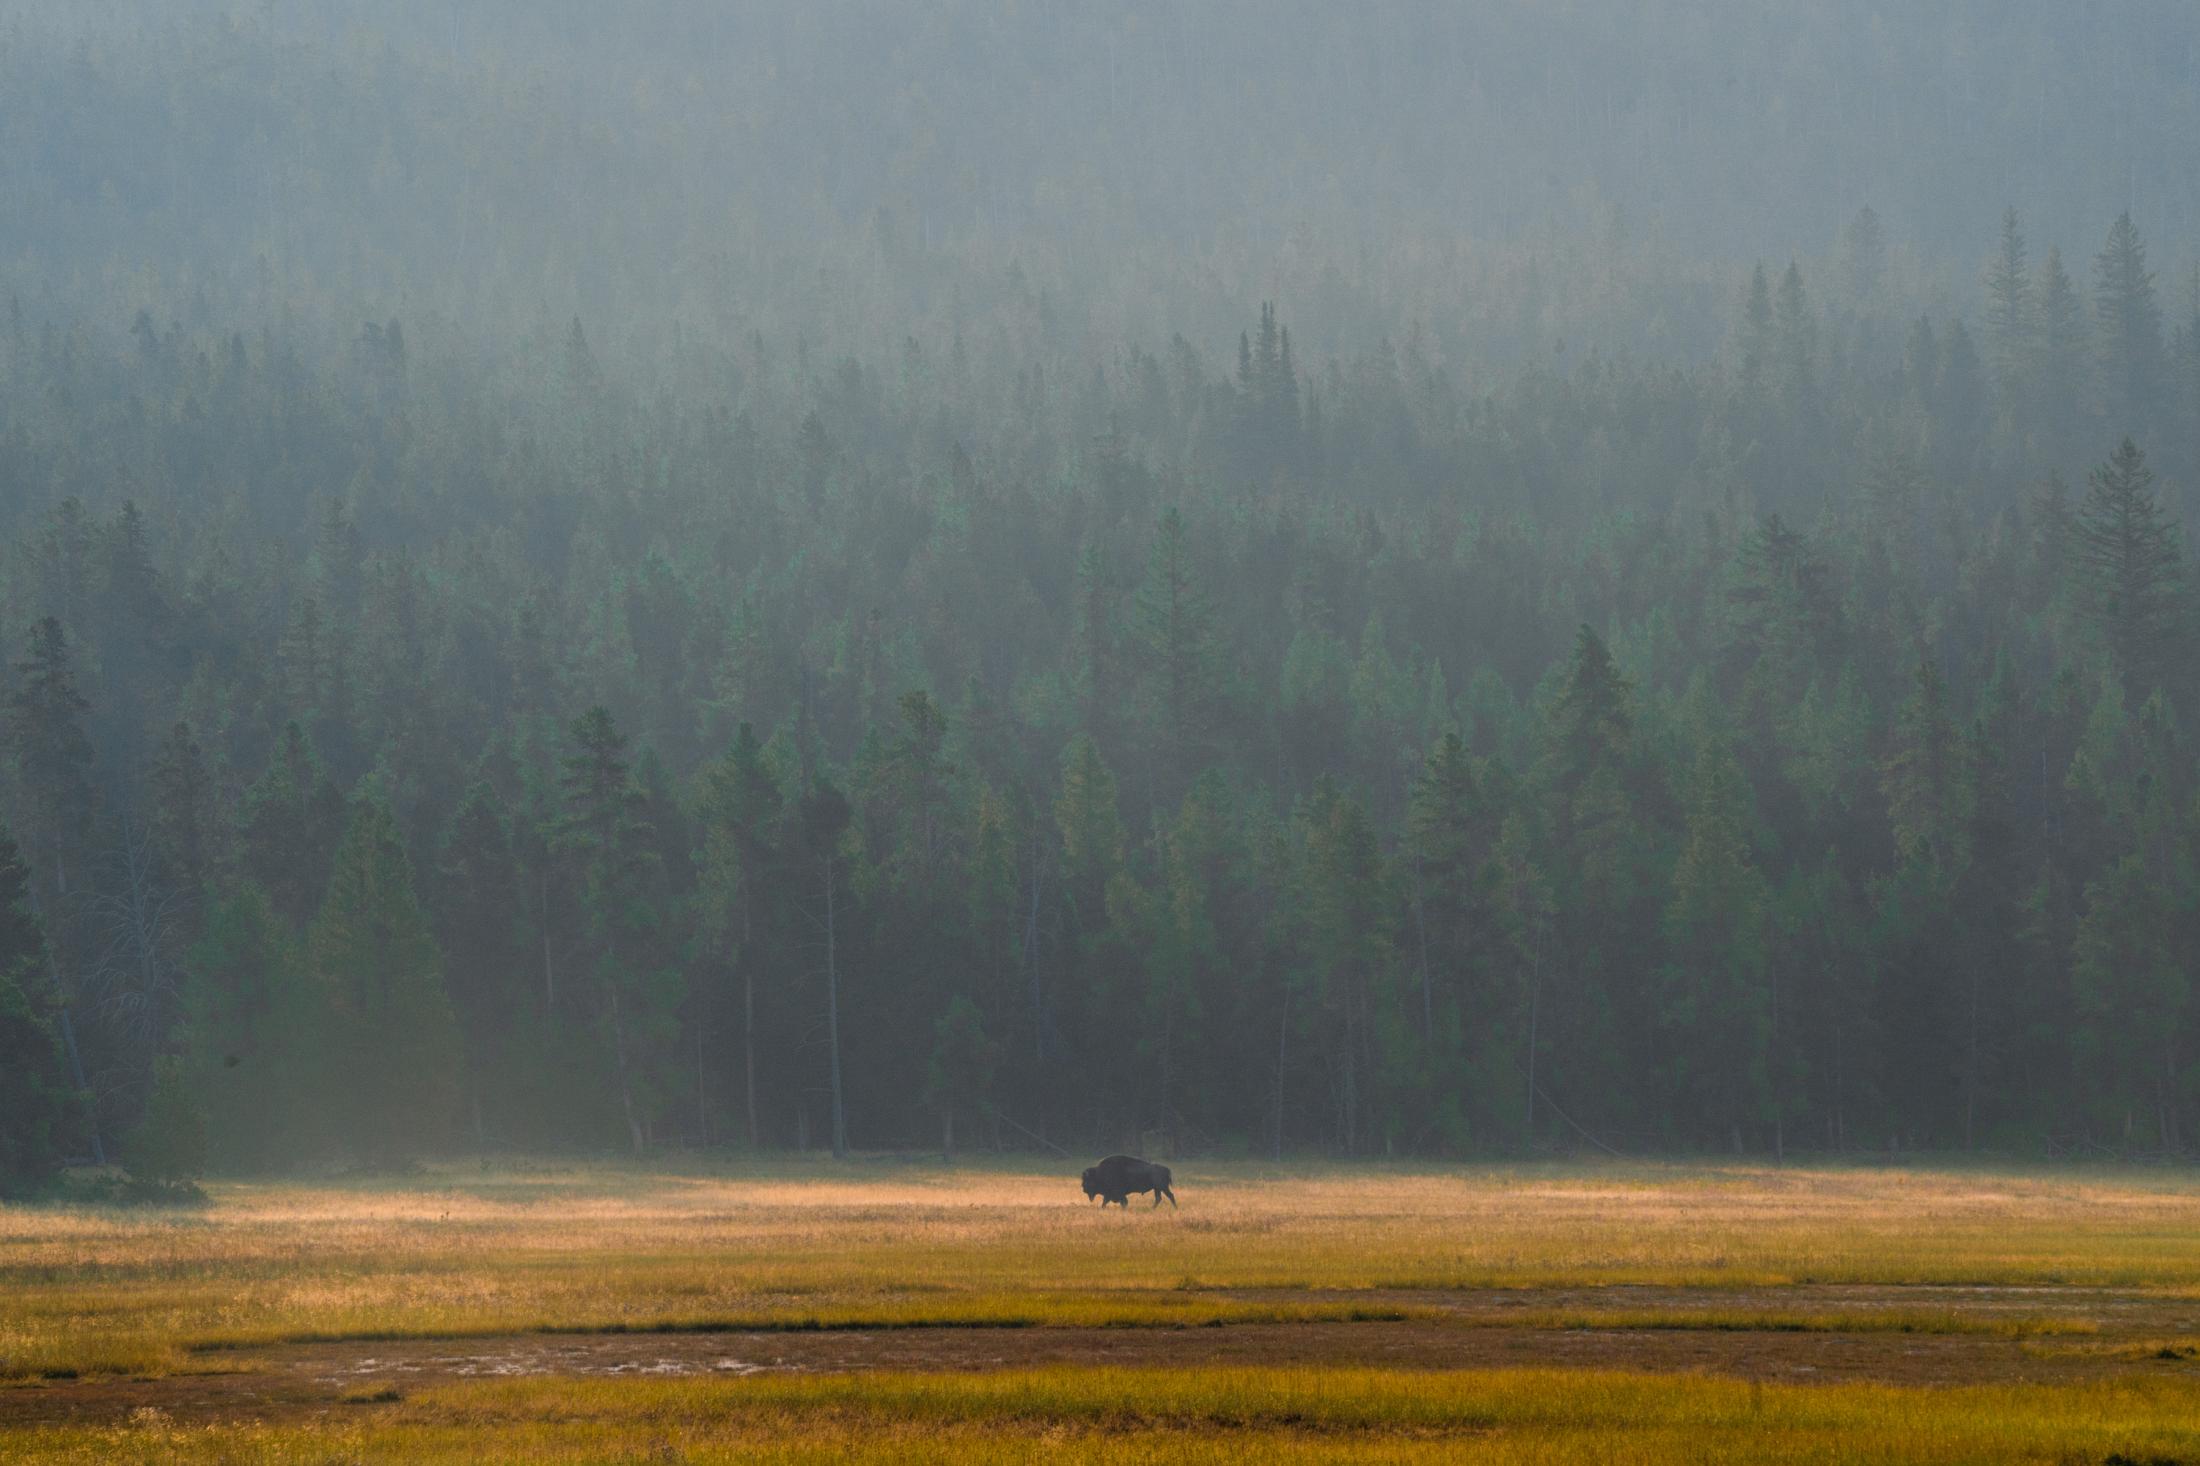 Bison, elk and social distance: A photographer’s view from Yellowstone during delta - A lone bison walks in the early morning.